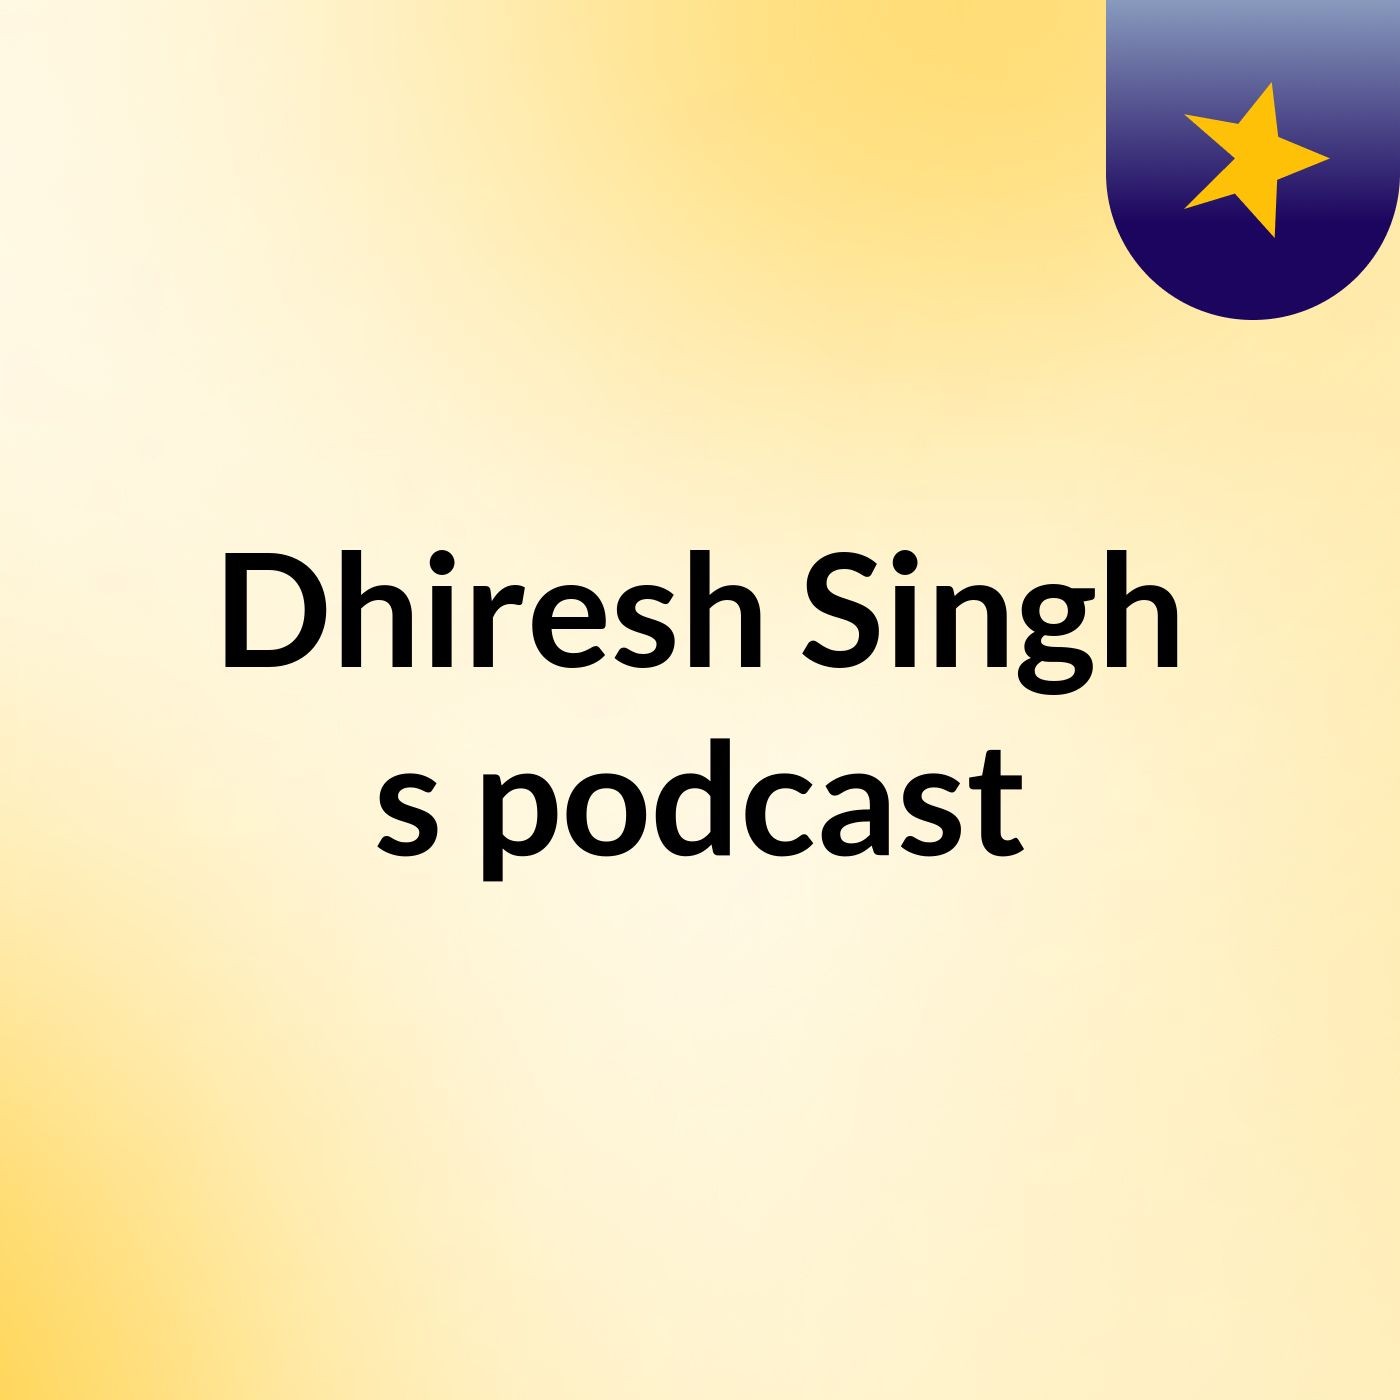 Episode 6 - Dhiresh Singh's podcast